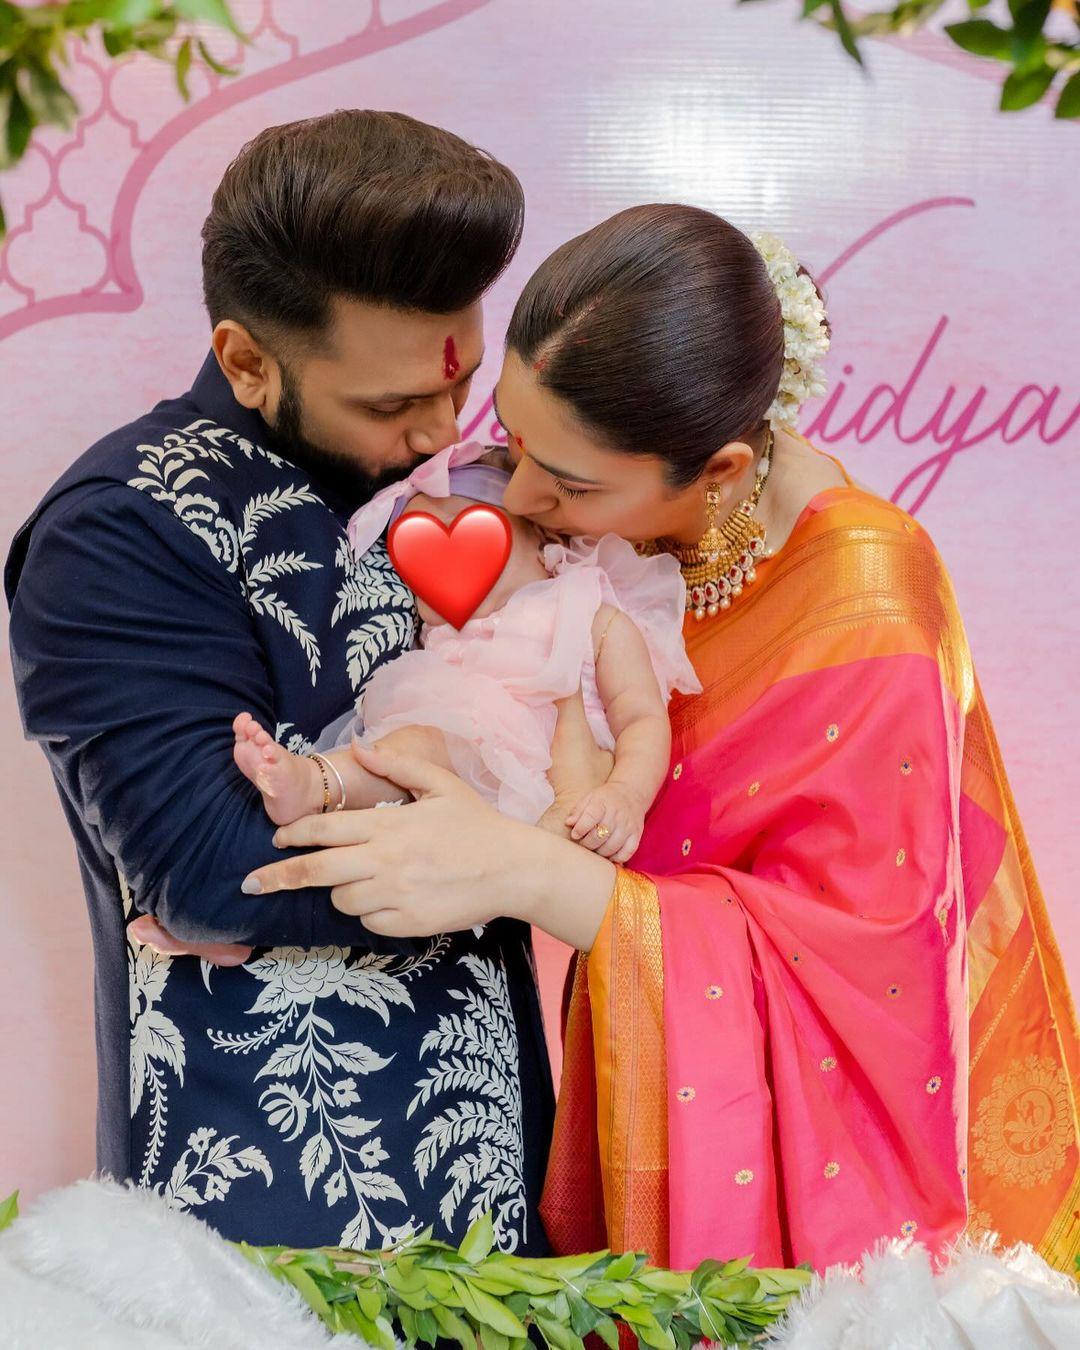 Rahul Vaidya and Disha Parmar
On a blissful Wednesday, September 20, Disha Parmar and Rahul Vaidya welcomed their first child, a beautiful baby girl Navya, marking a momentous milestone in their journey together